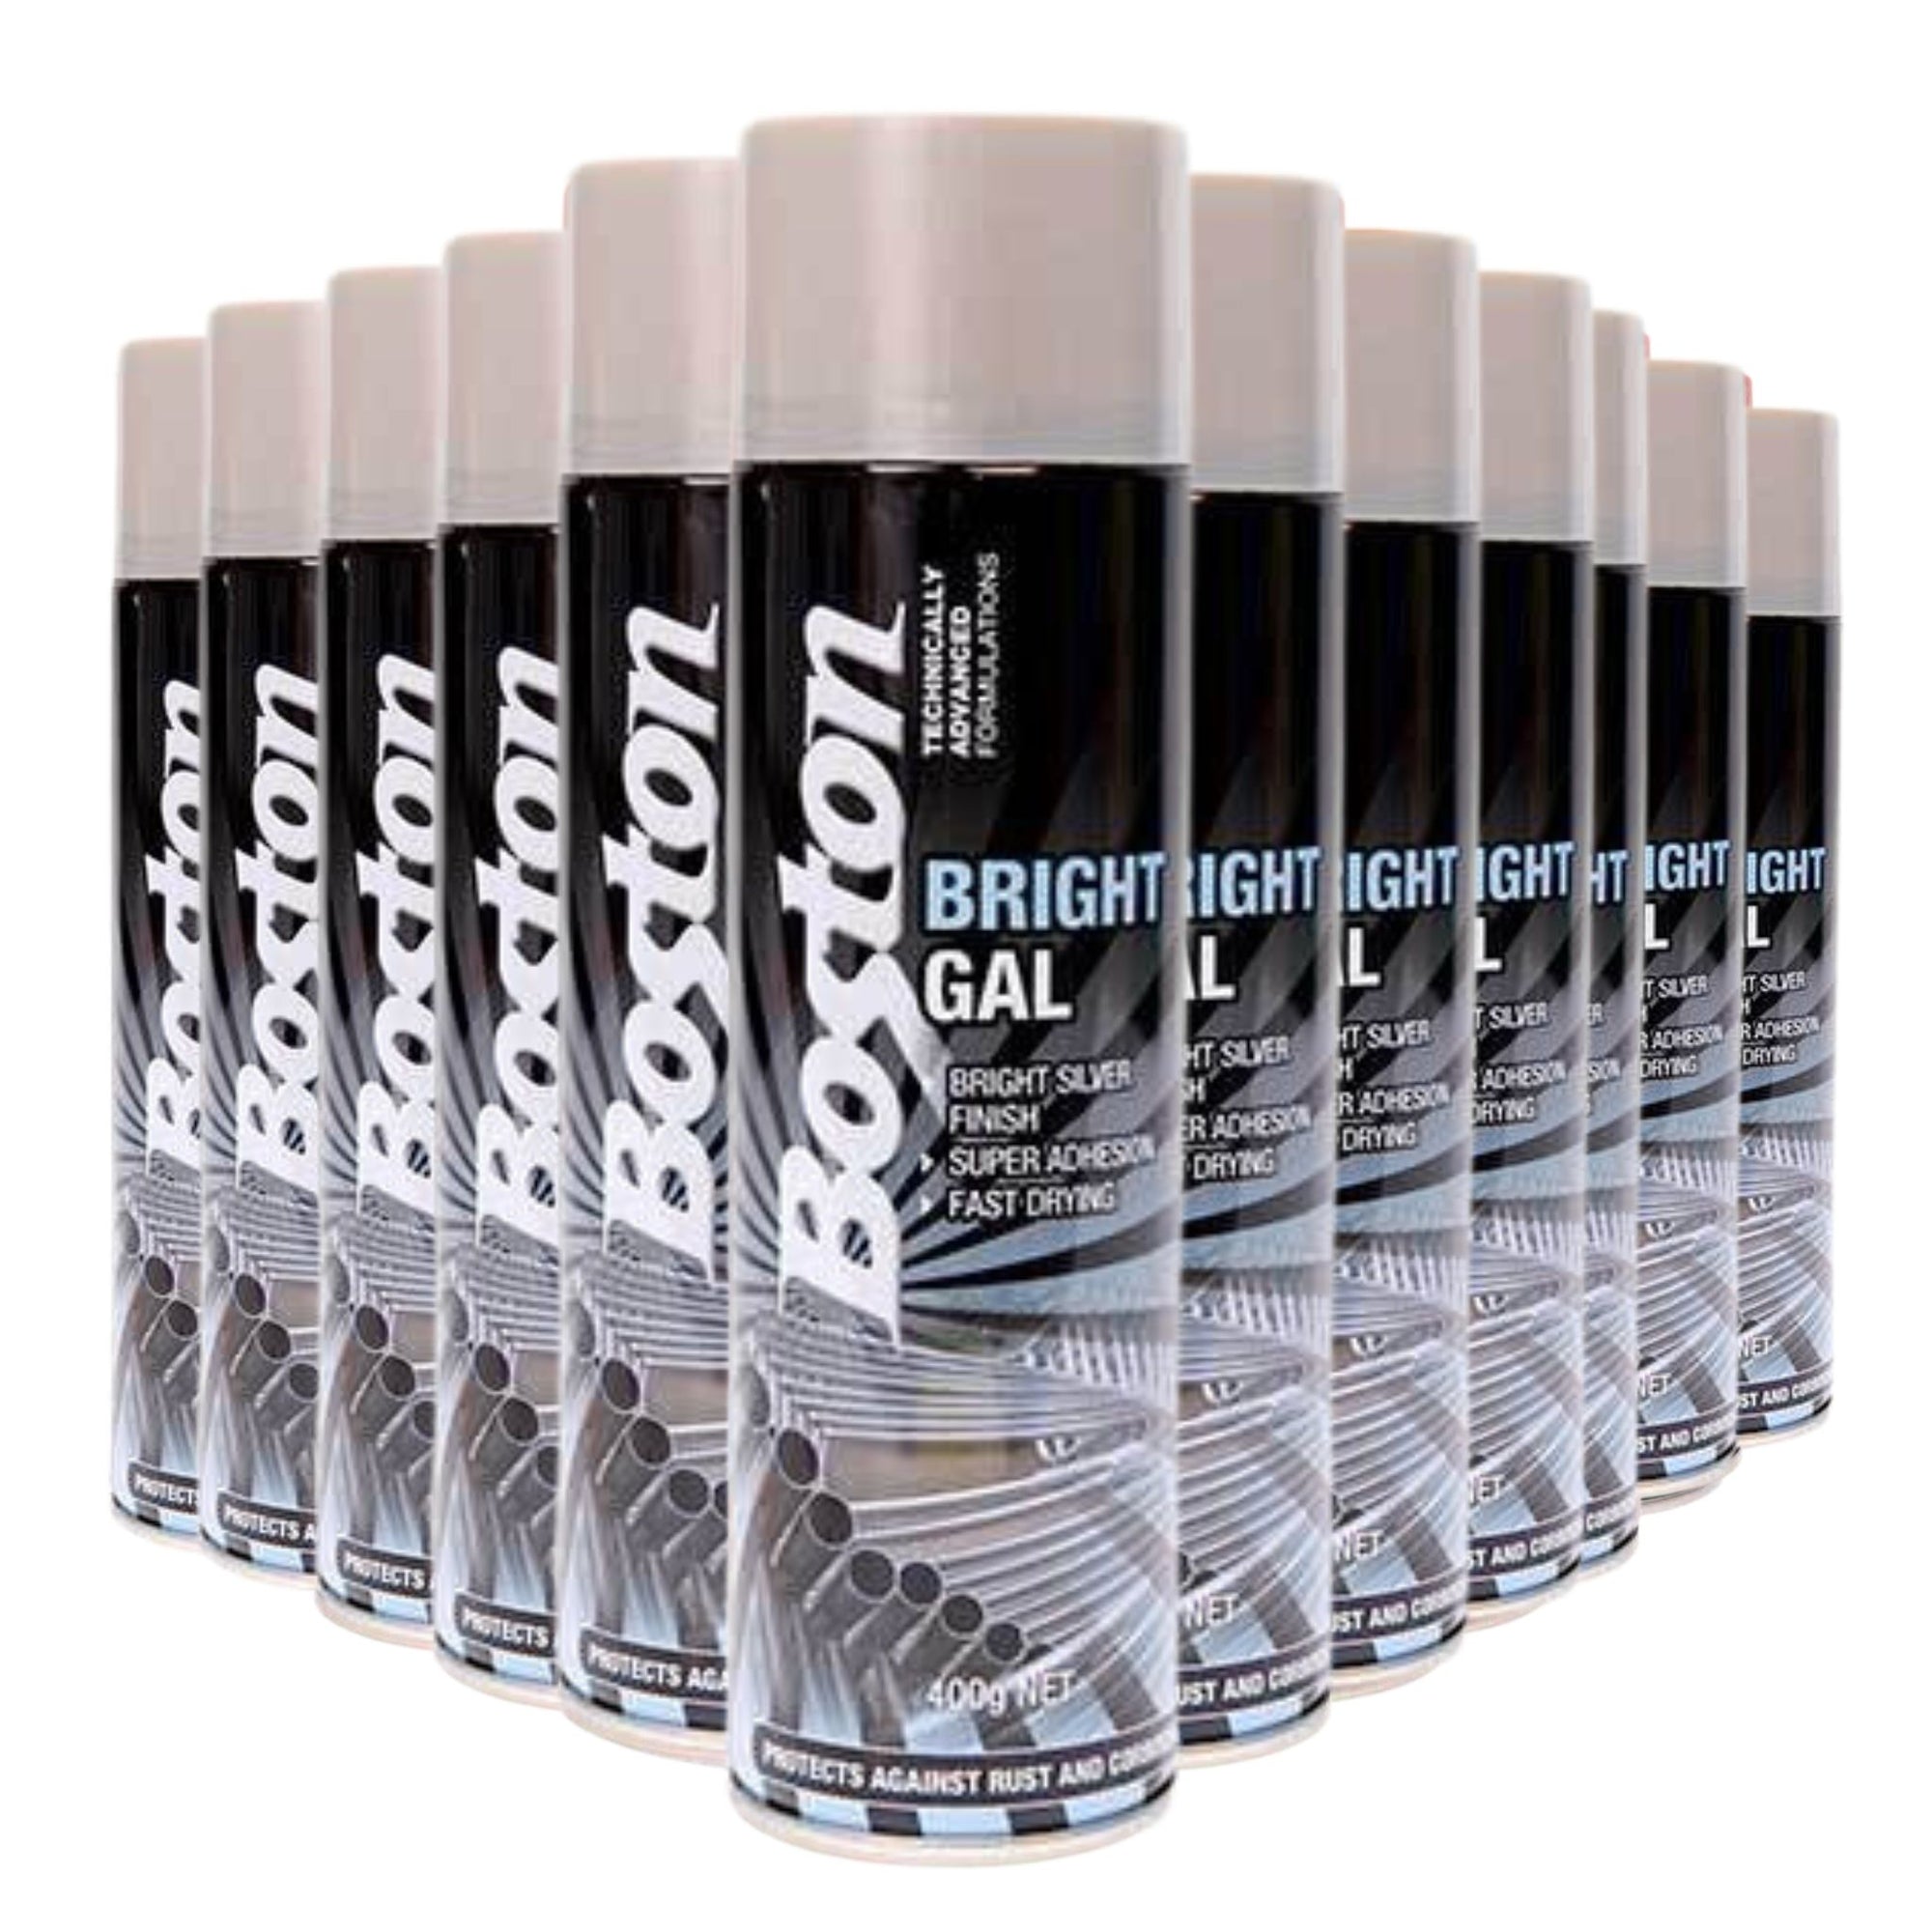 12 CANS | Boston Spray Paint Bright Gal 400g BT257 - South East Clearance Centre